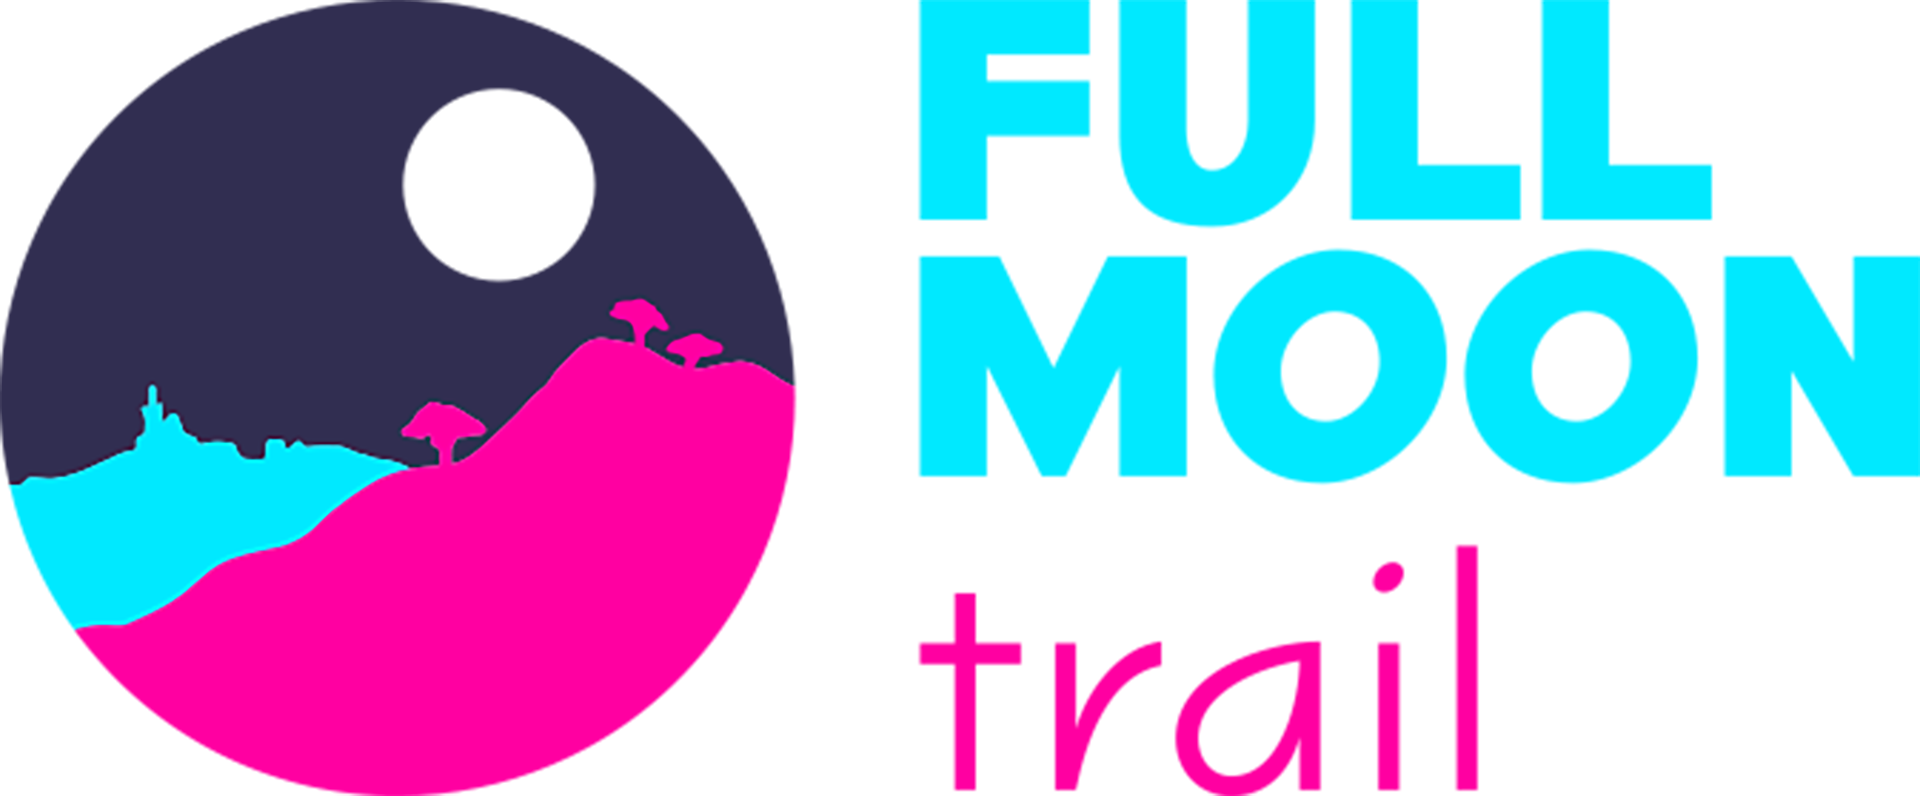 Picto Full Moon Trail